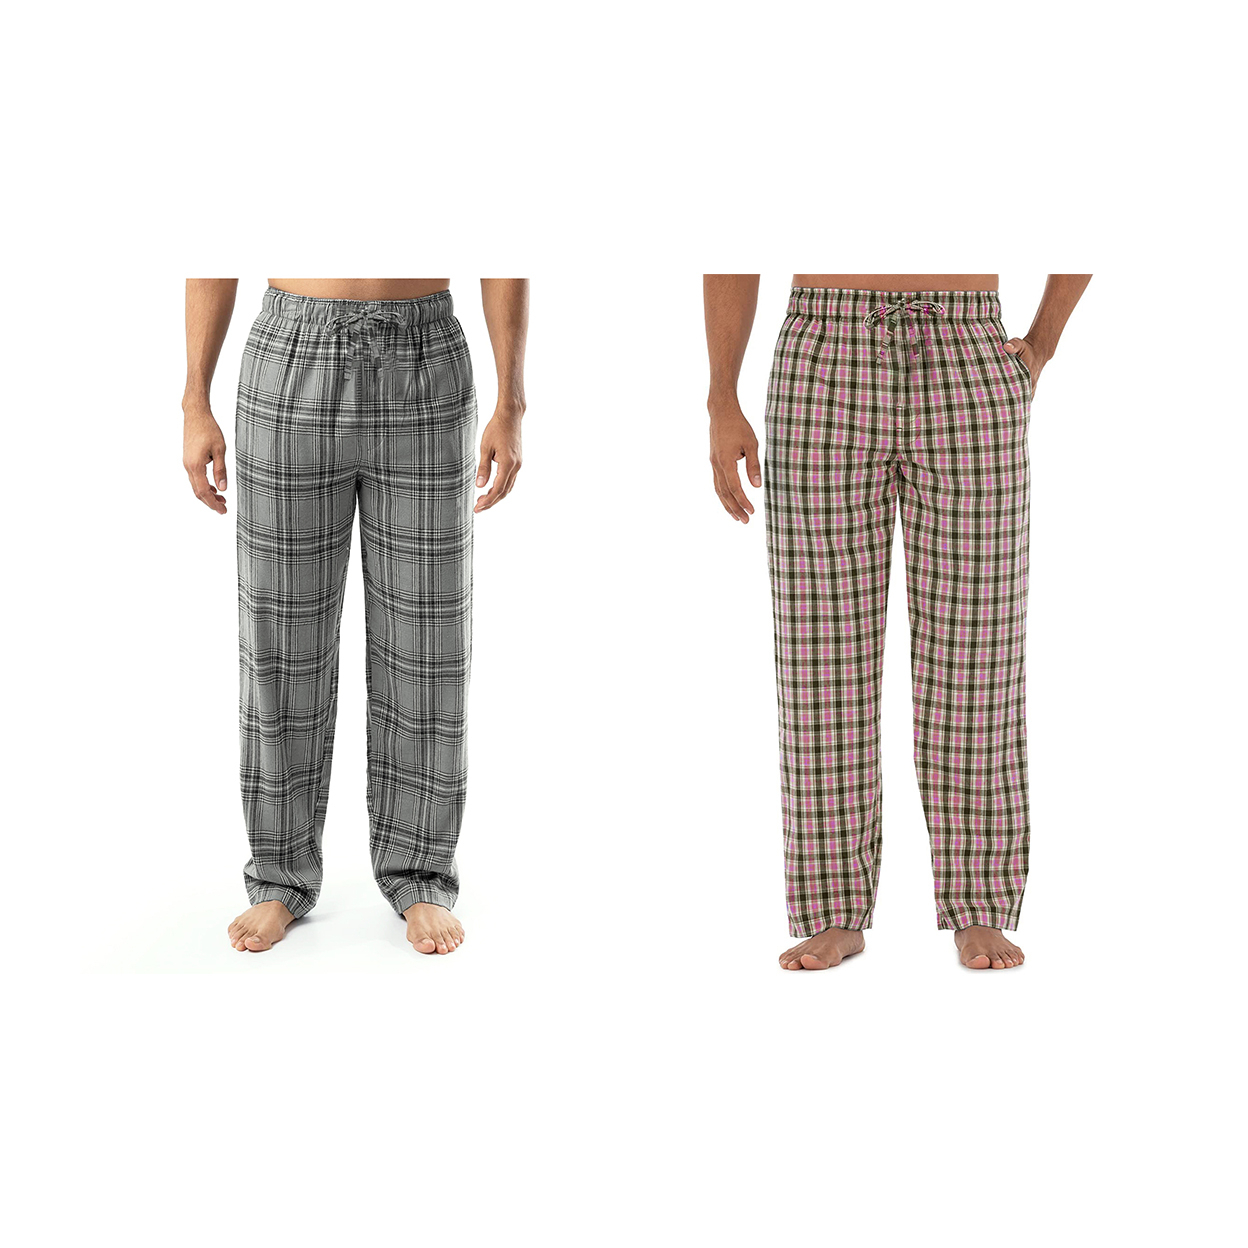 3-Pack: Men's Soft Jersey Knit Long Lounge Sleep Pants With Pockets - Solid & Plaid, Medium